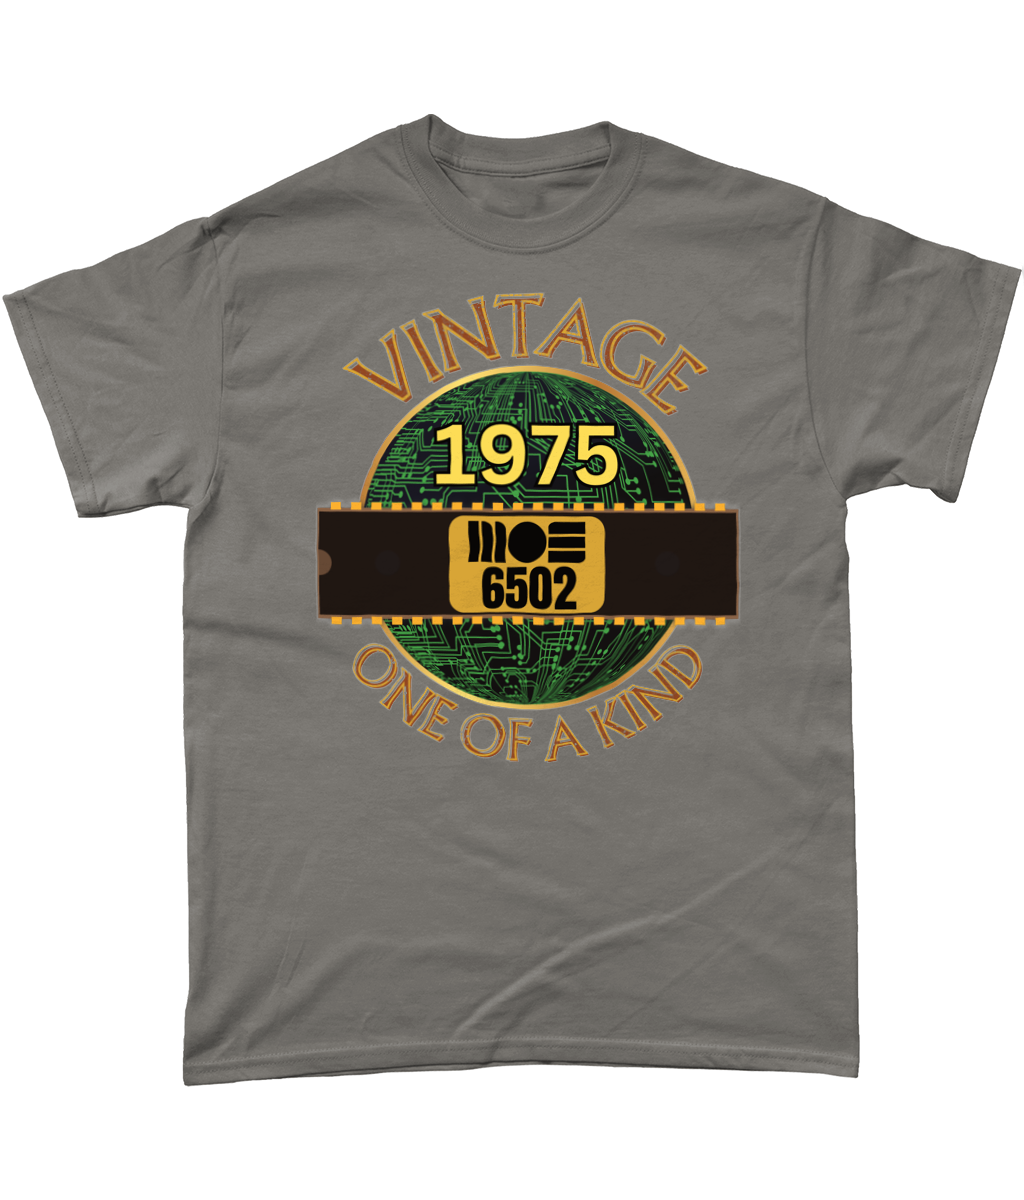 Charcoal T-shirtBlack with a gold circle with a basic representation of a circuit board in green and a 40 pin chip across the front with MOS 6502 and 1975 written on it. Vintage one of a kind around the circle